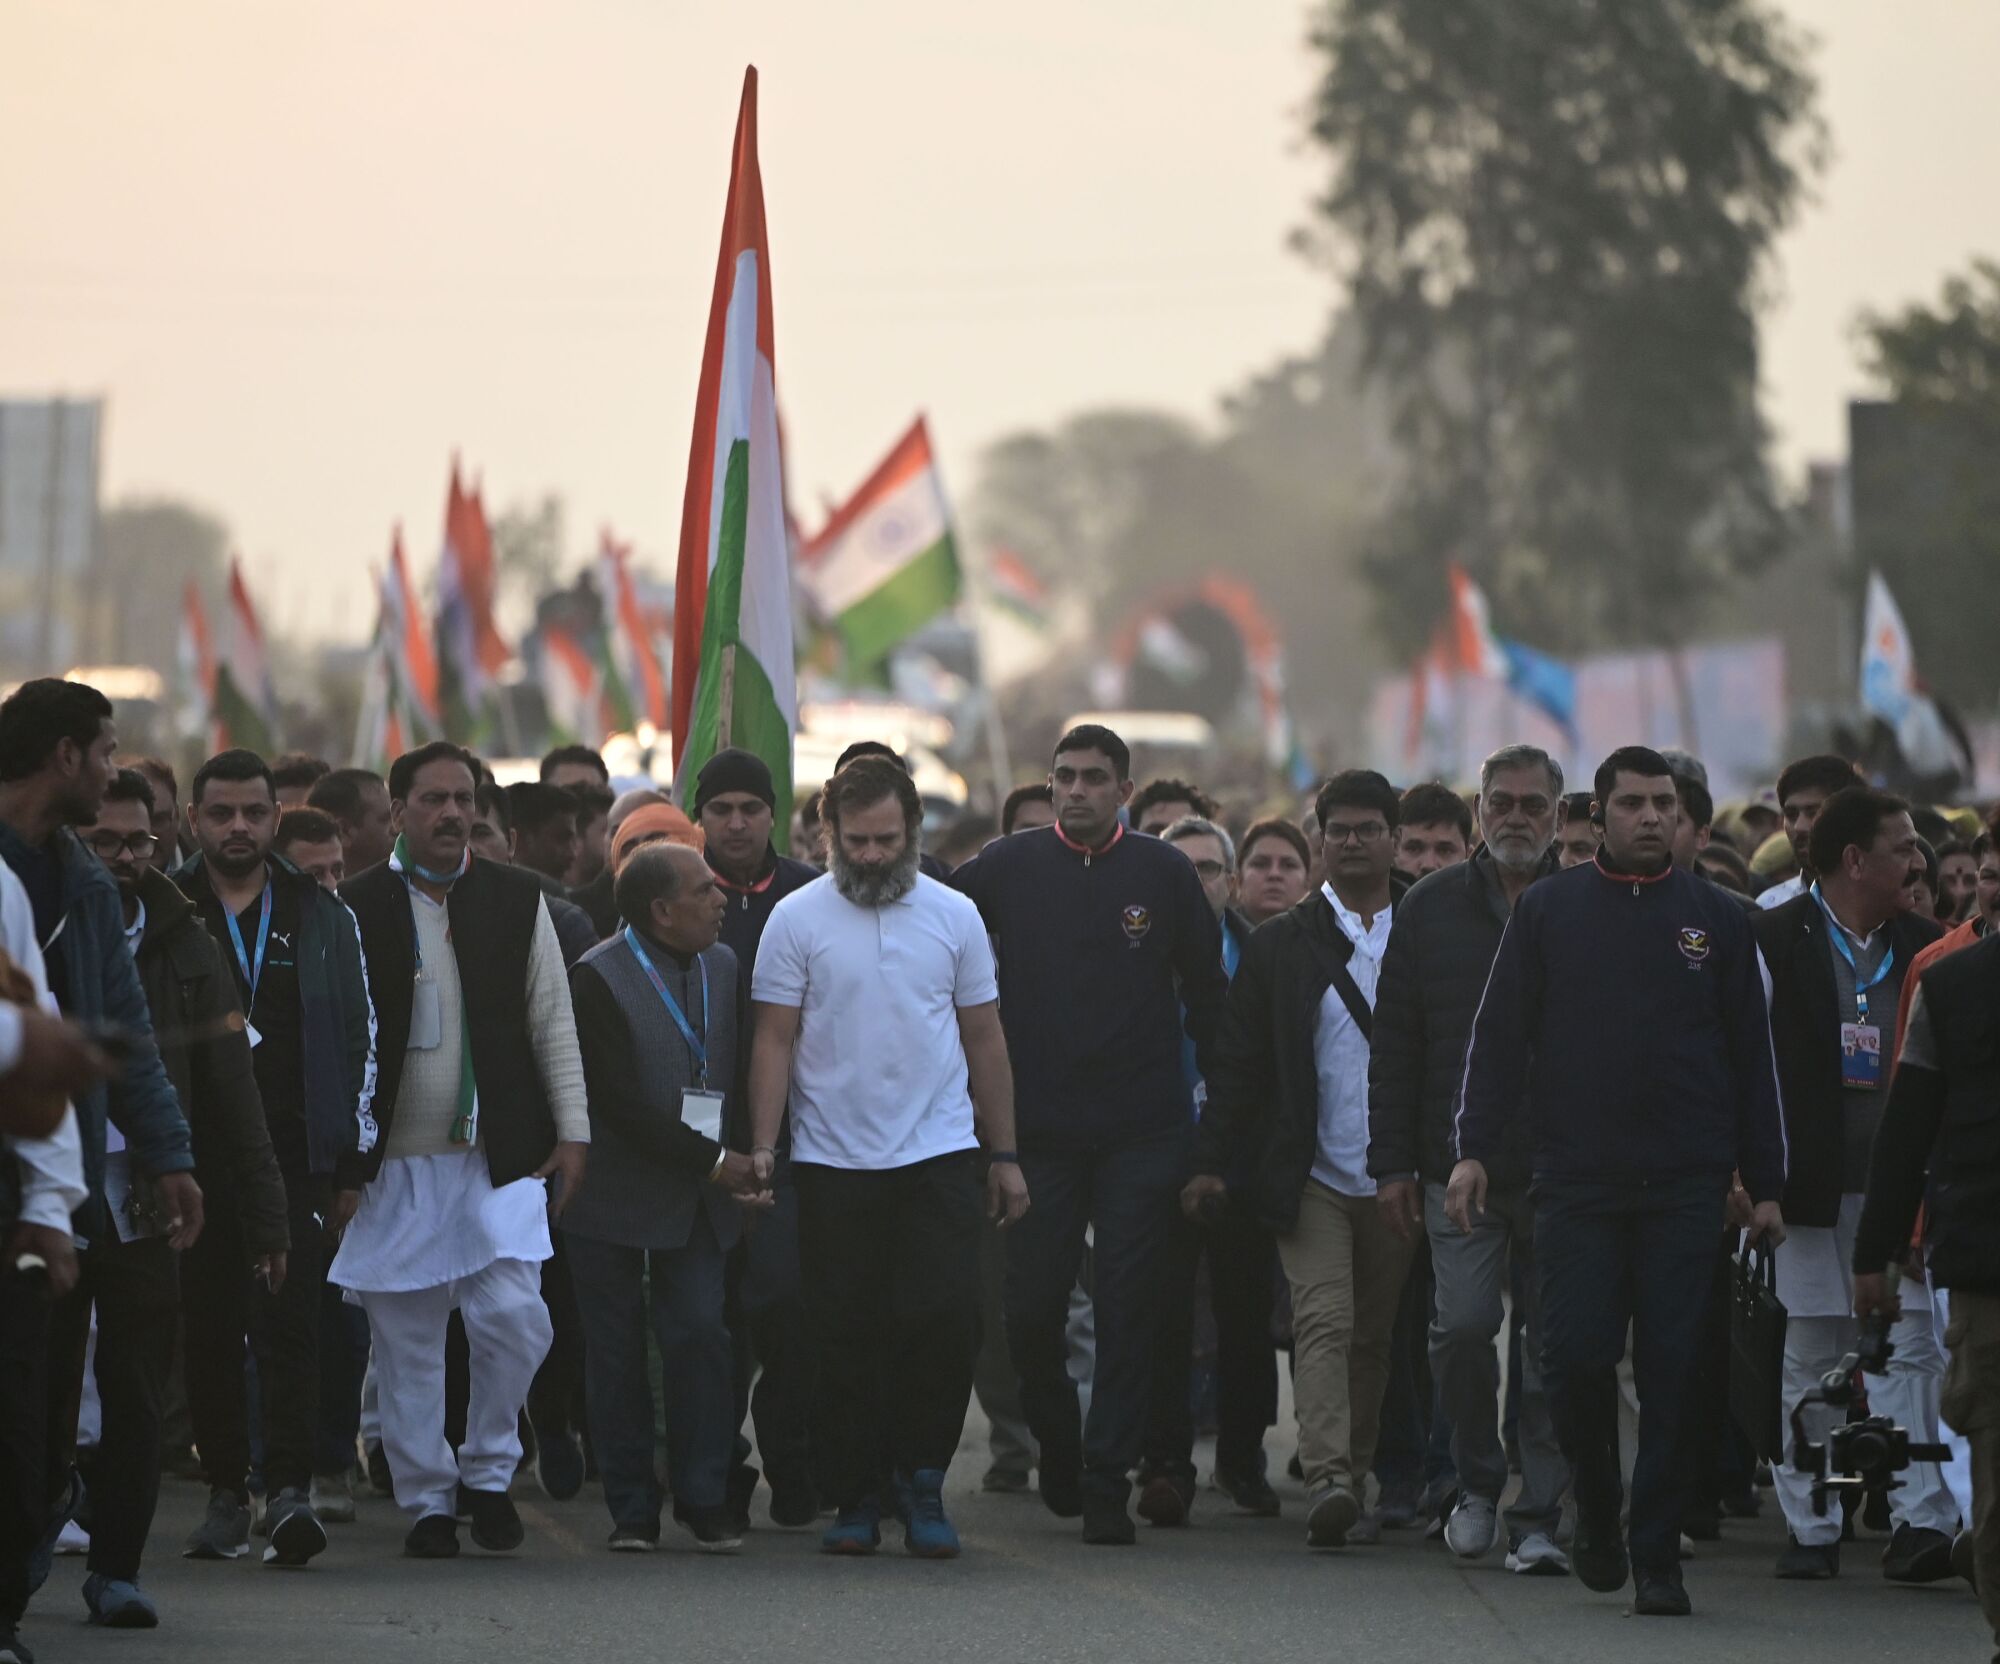 Congress leader Rahul Gandhi with supporters